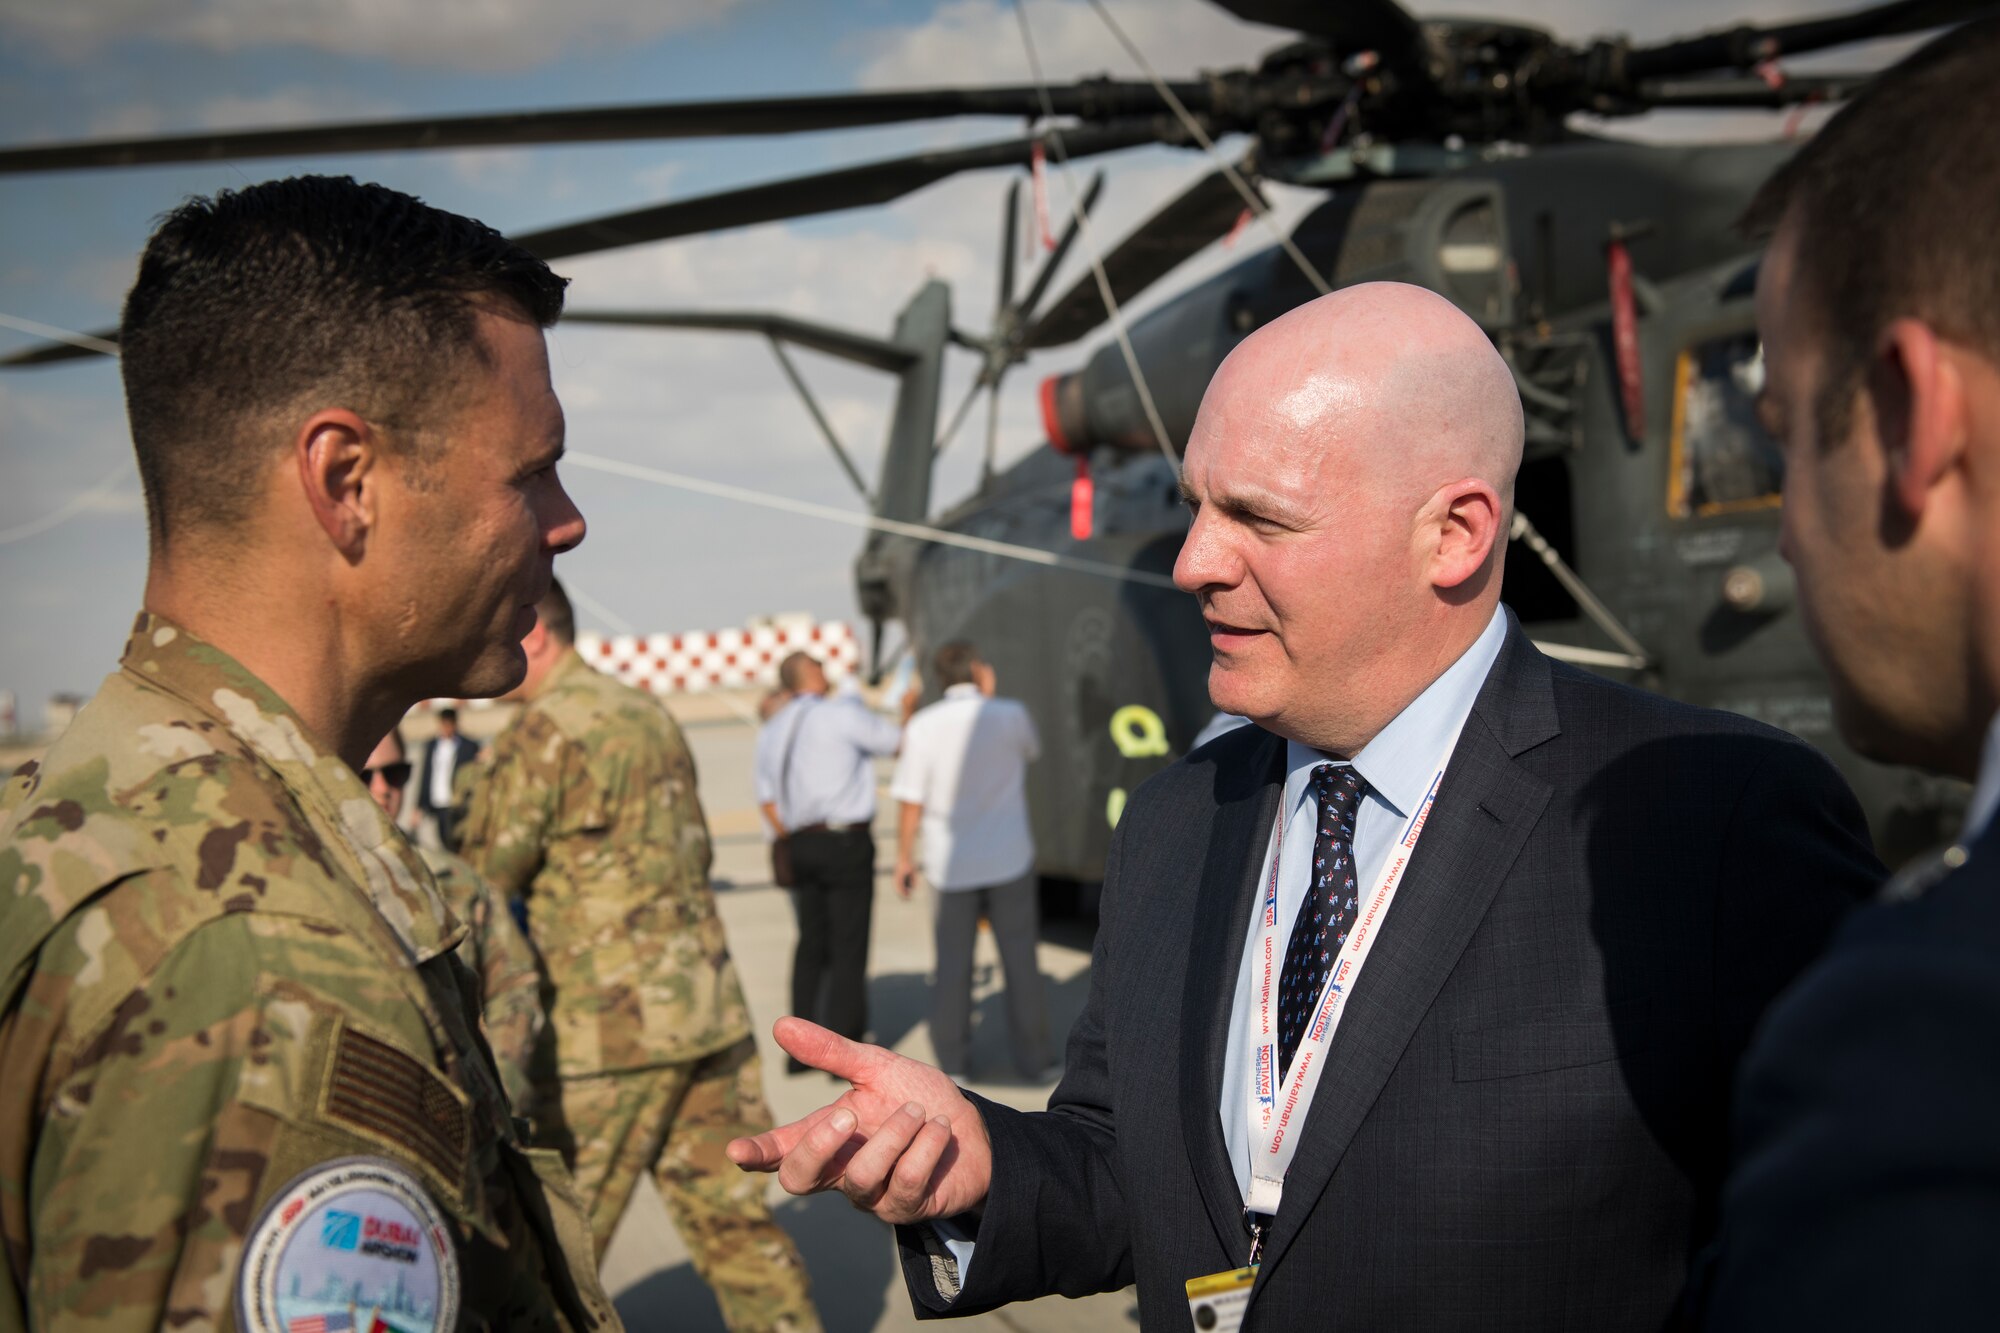 R. Clarke Cooper, left, Assistant Secretary of State for Political-Military Affairs, converses with U.S. Air Force Col. Thad Middleton, commander of the 22nd Operations Group, McConnell Air Force Base, Kansas, at the Dubai Airshow, United Arab Emirates, Nov. 17, 2019.